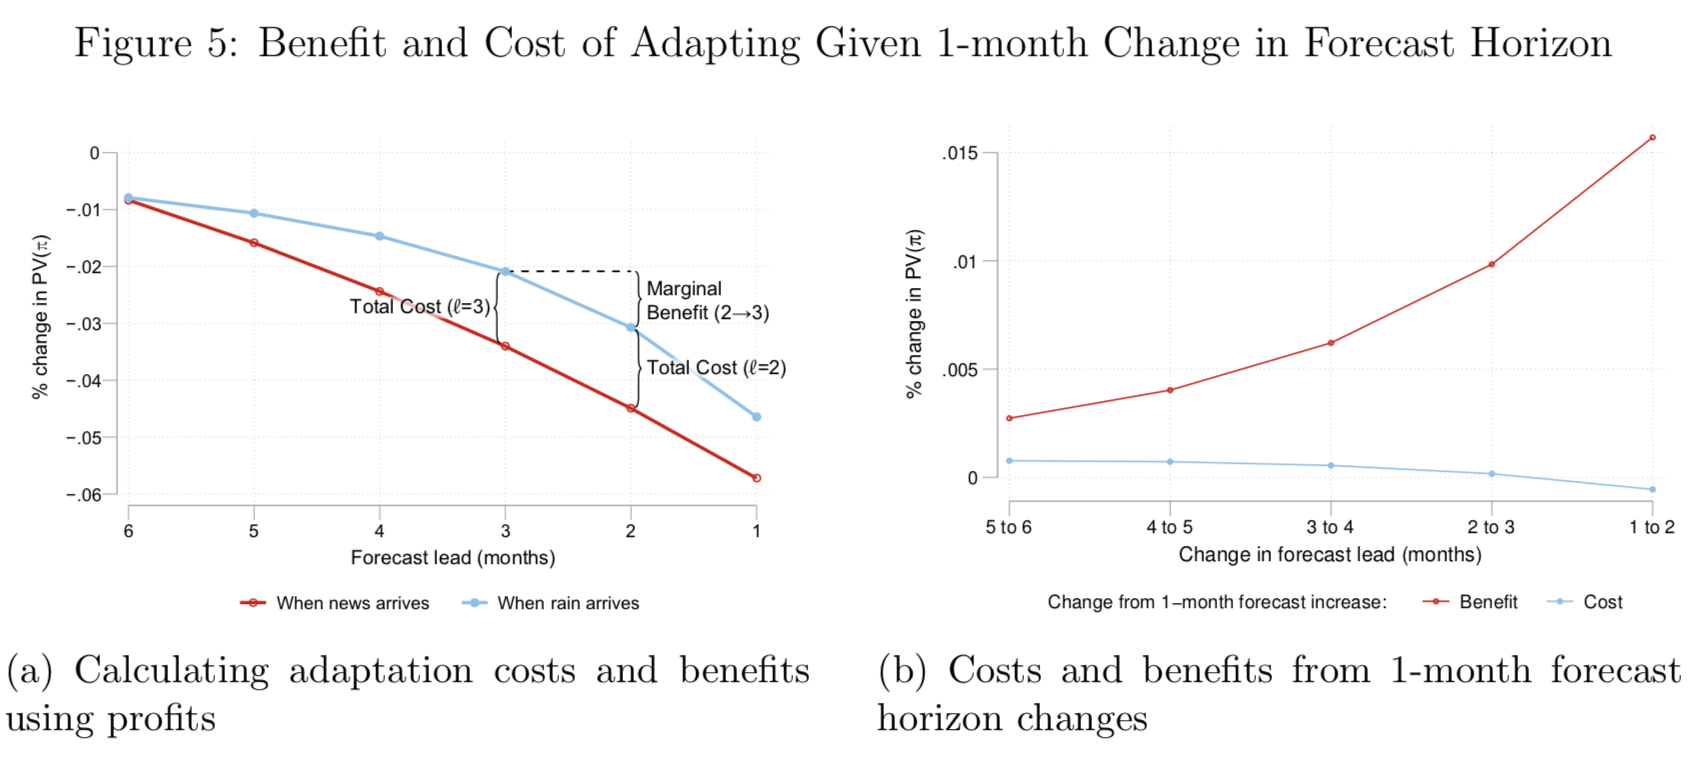 Benefit and Cost of Adapting Given 1-month Change in Forecast Horizon